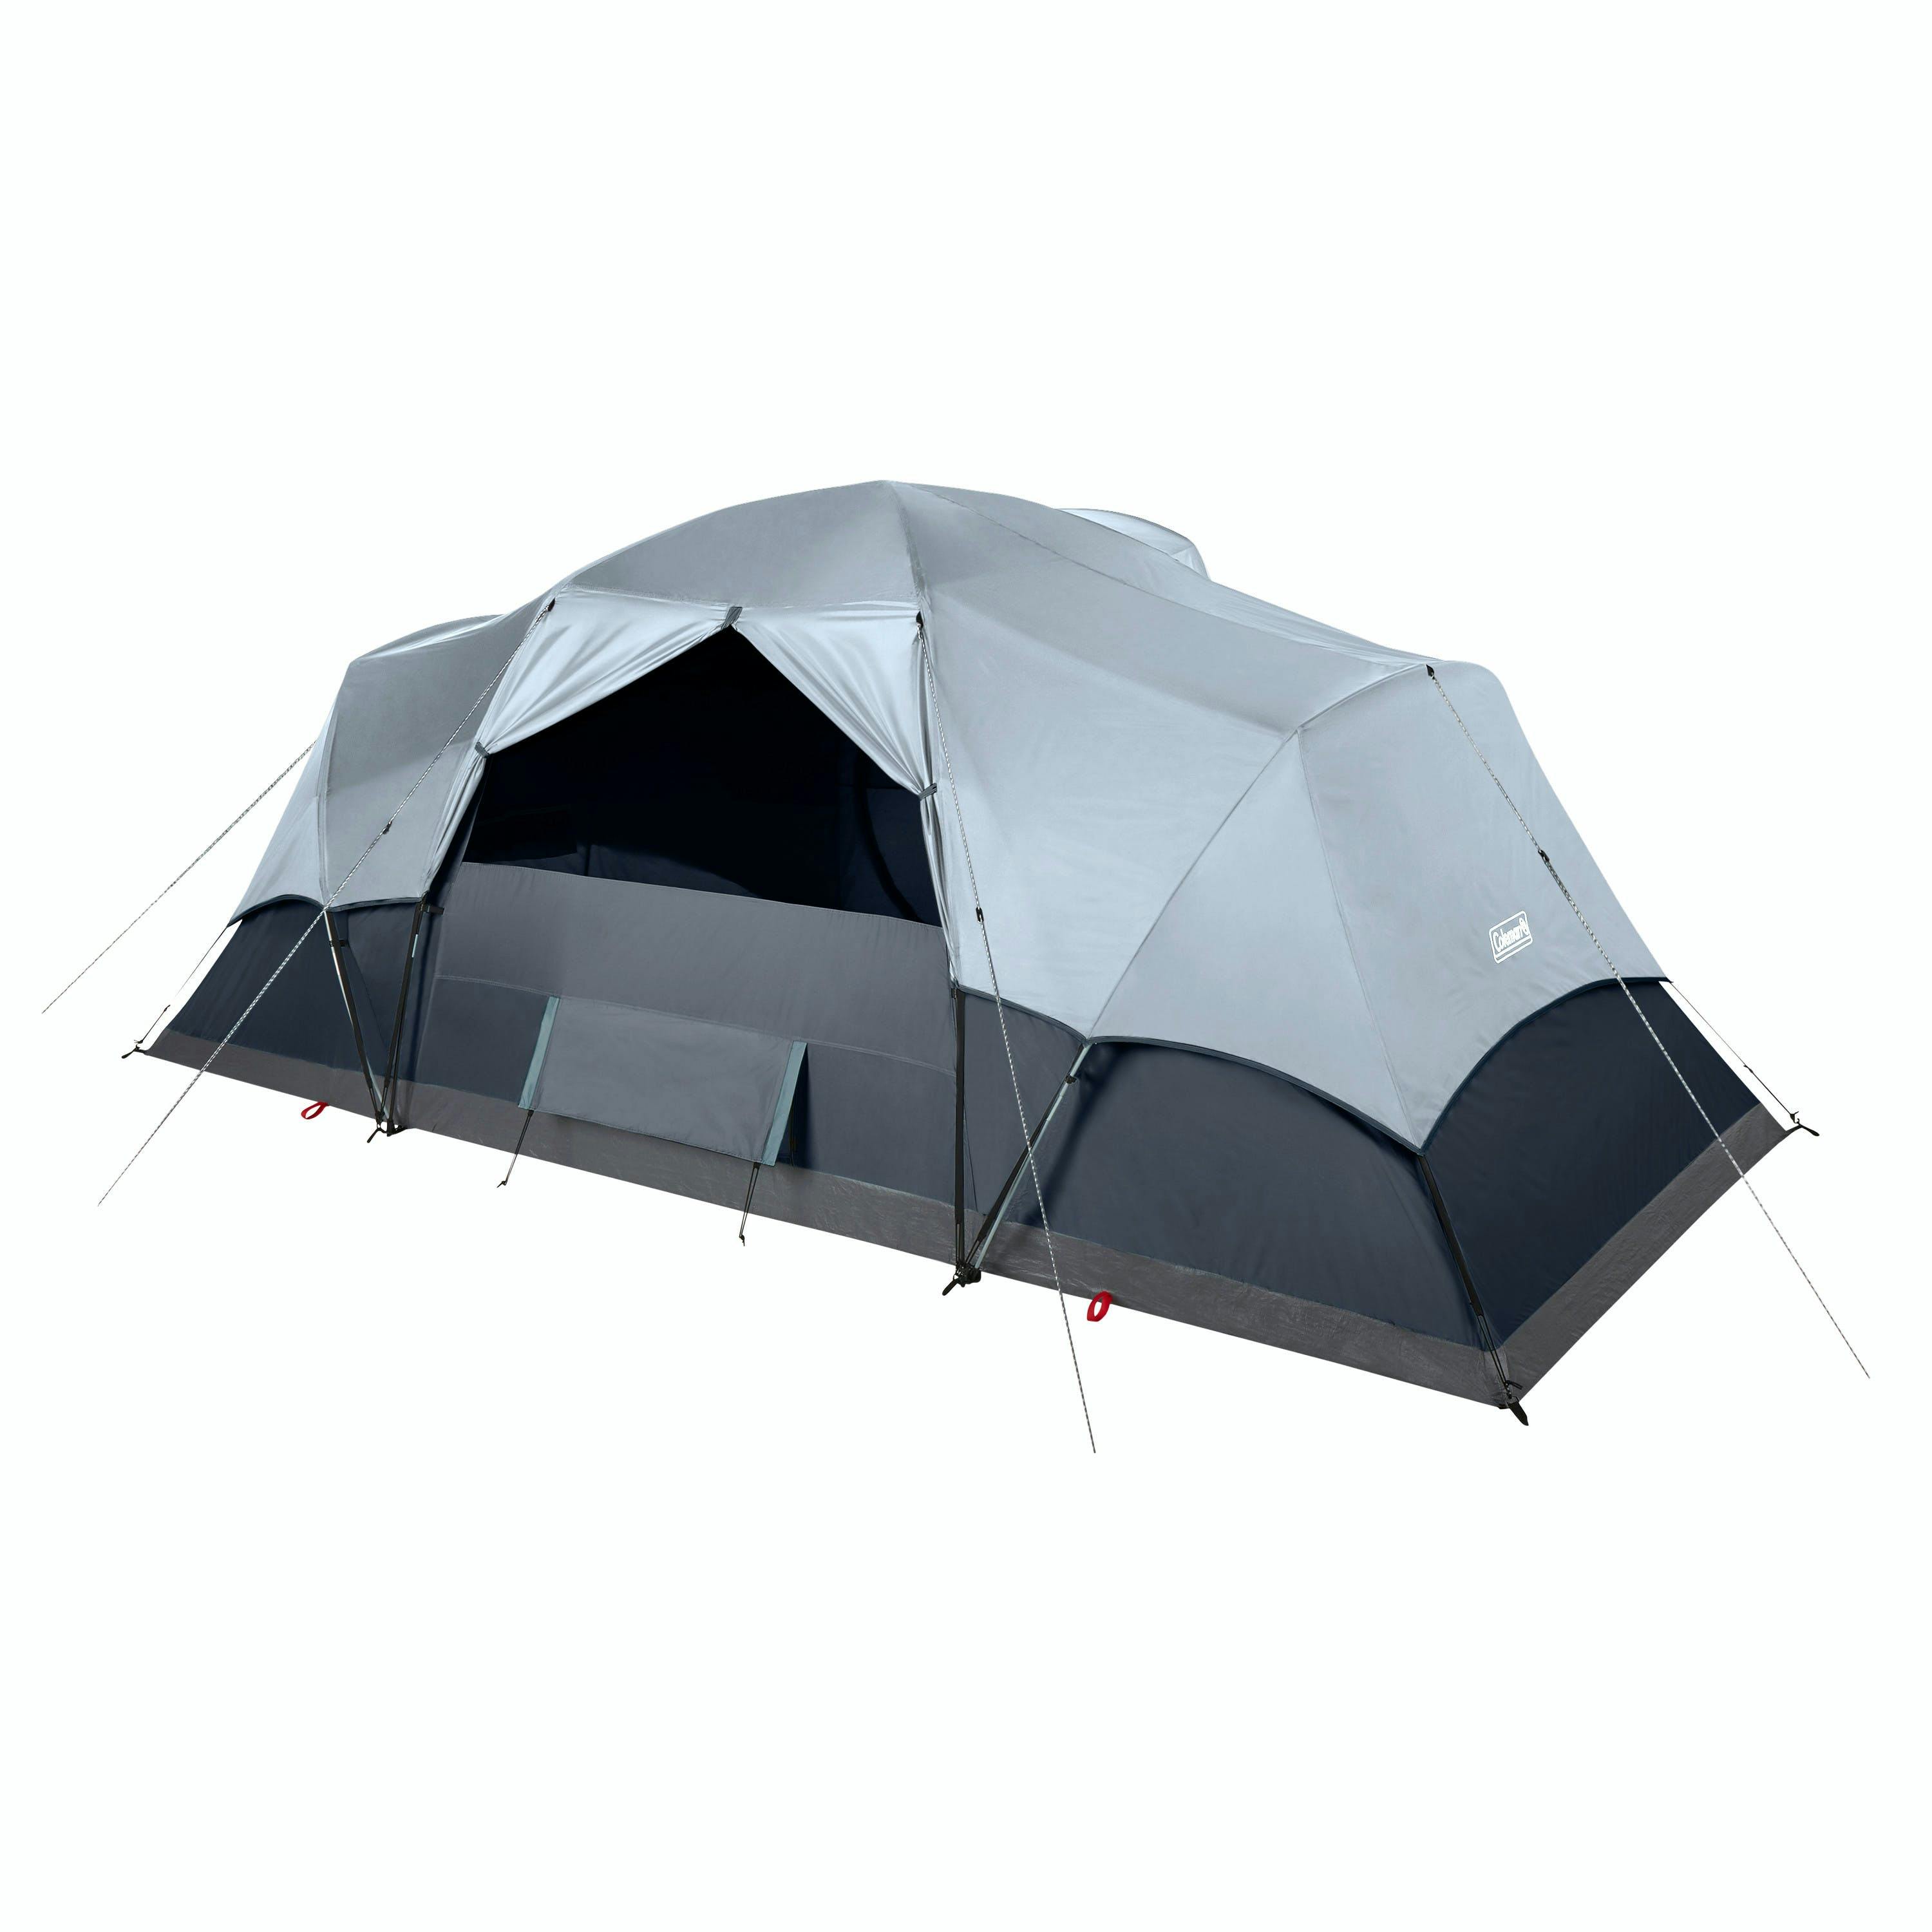 Coleman Skydome XL Camping Tent with LED Lighting